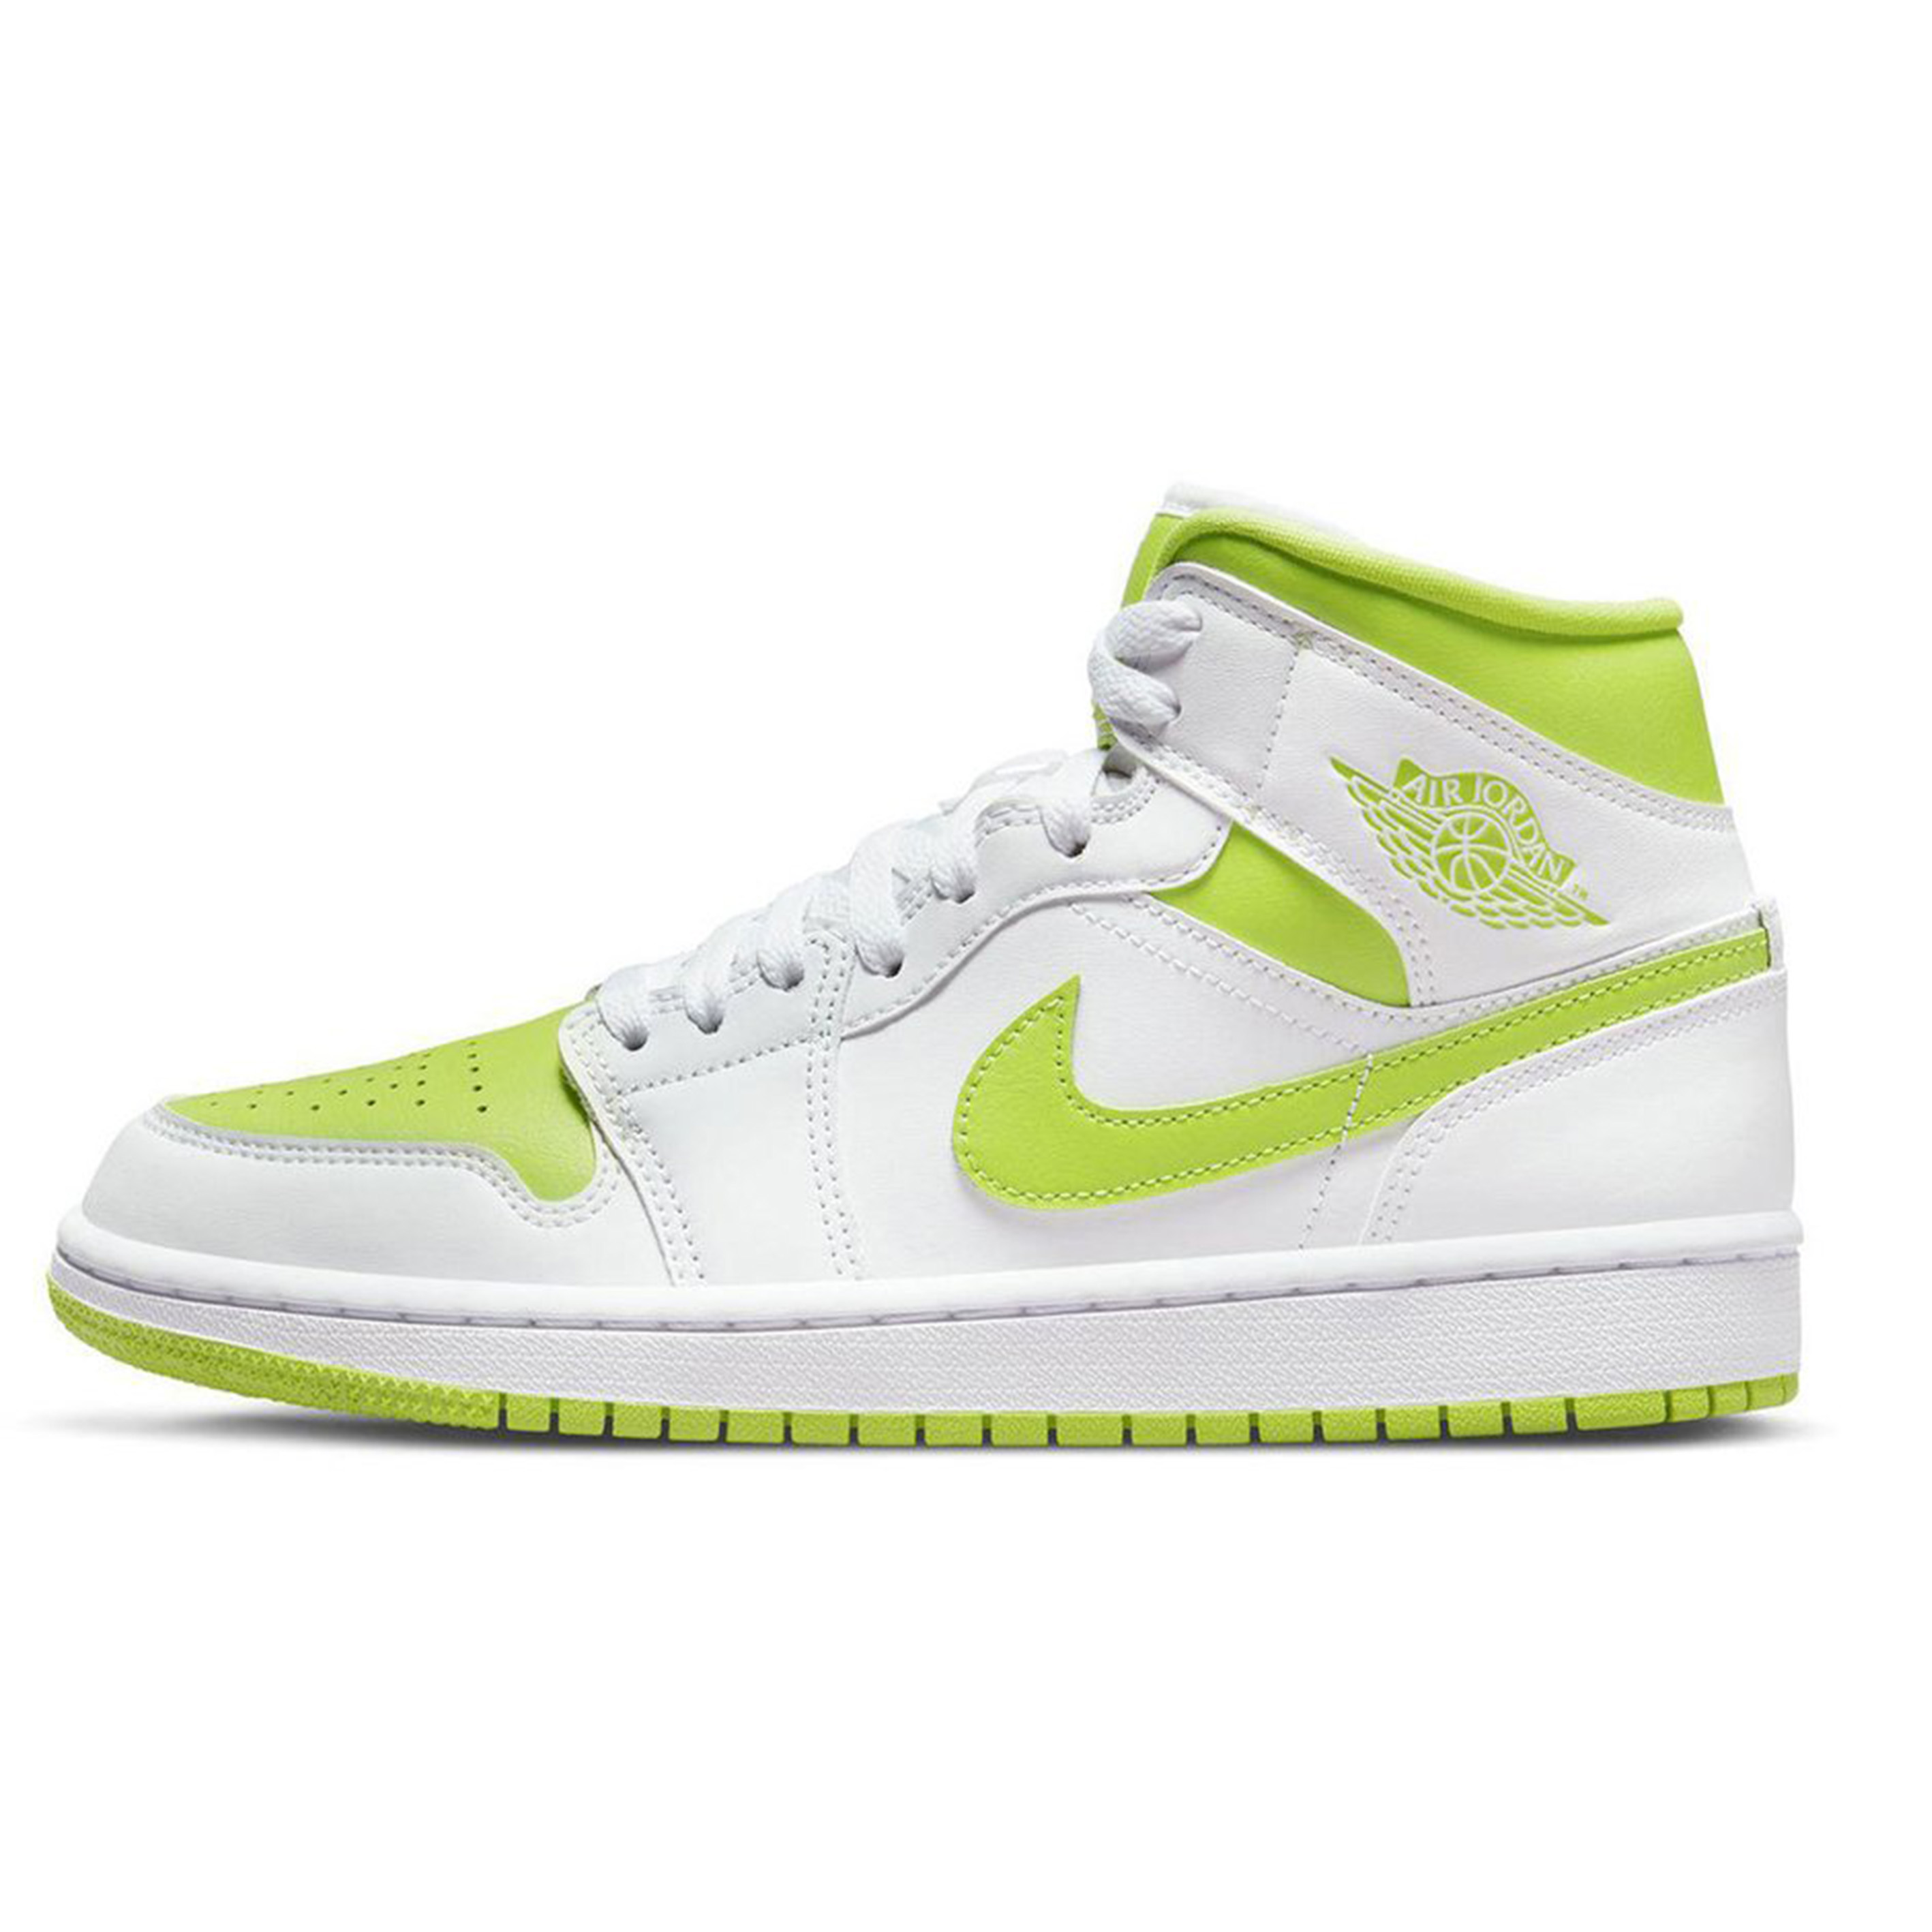 【SOLD OUT】【会員販売】Nike WMNS Air Jordan 1 Mid 